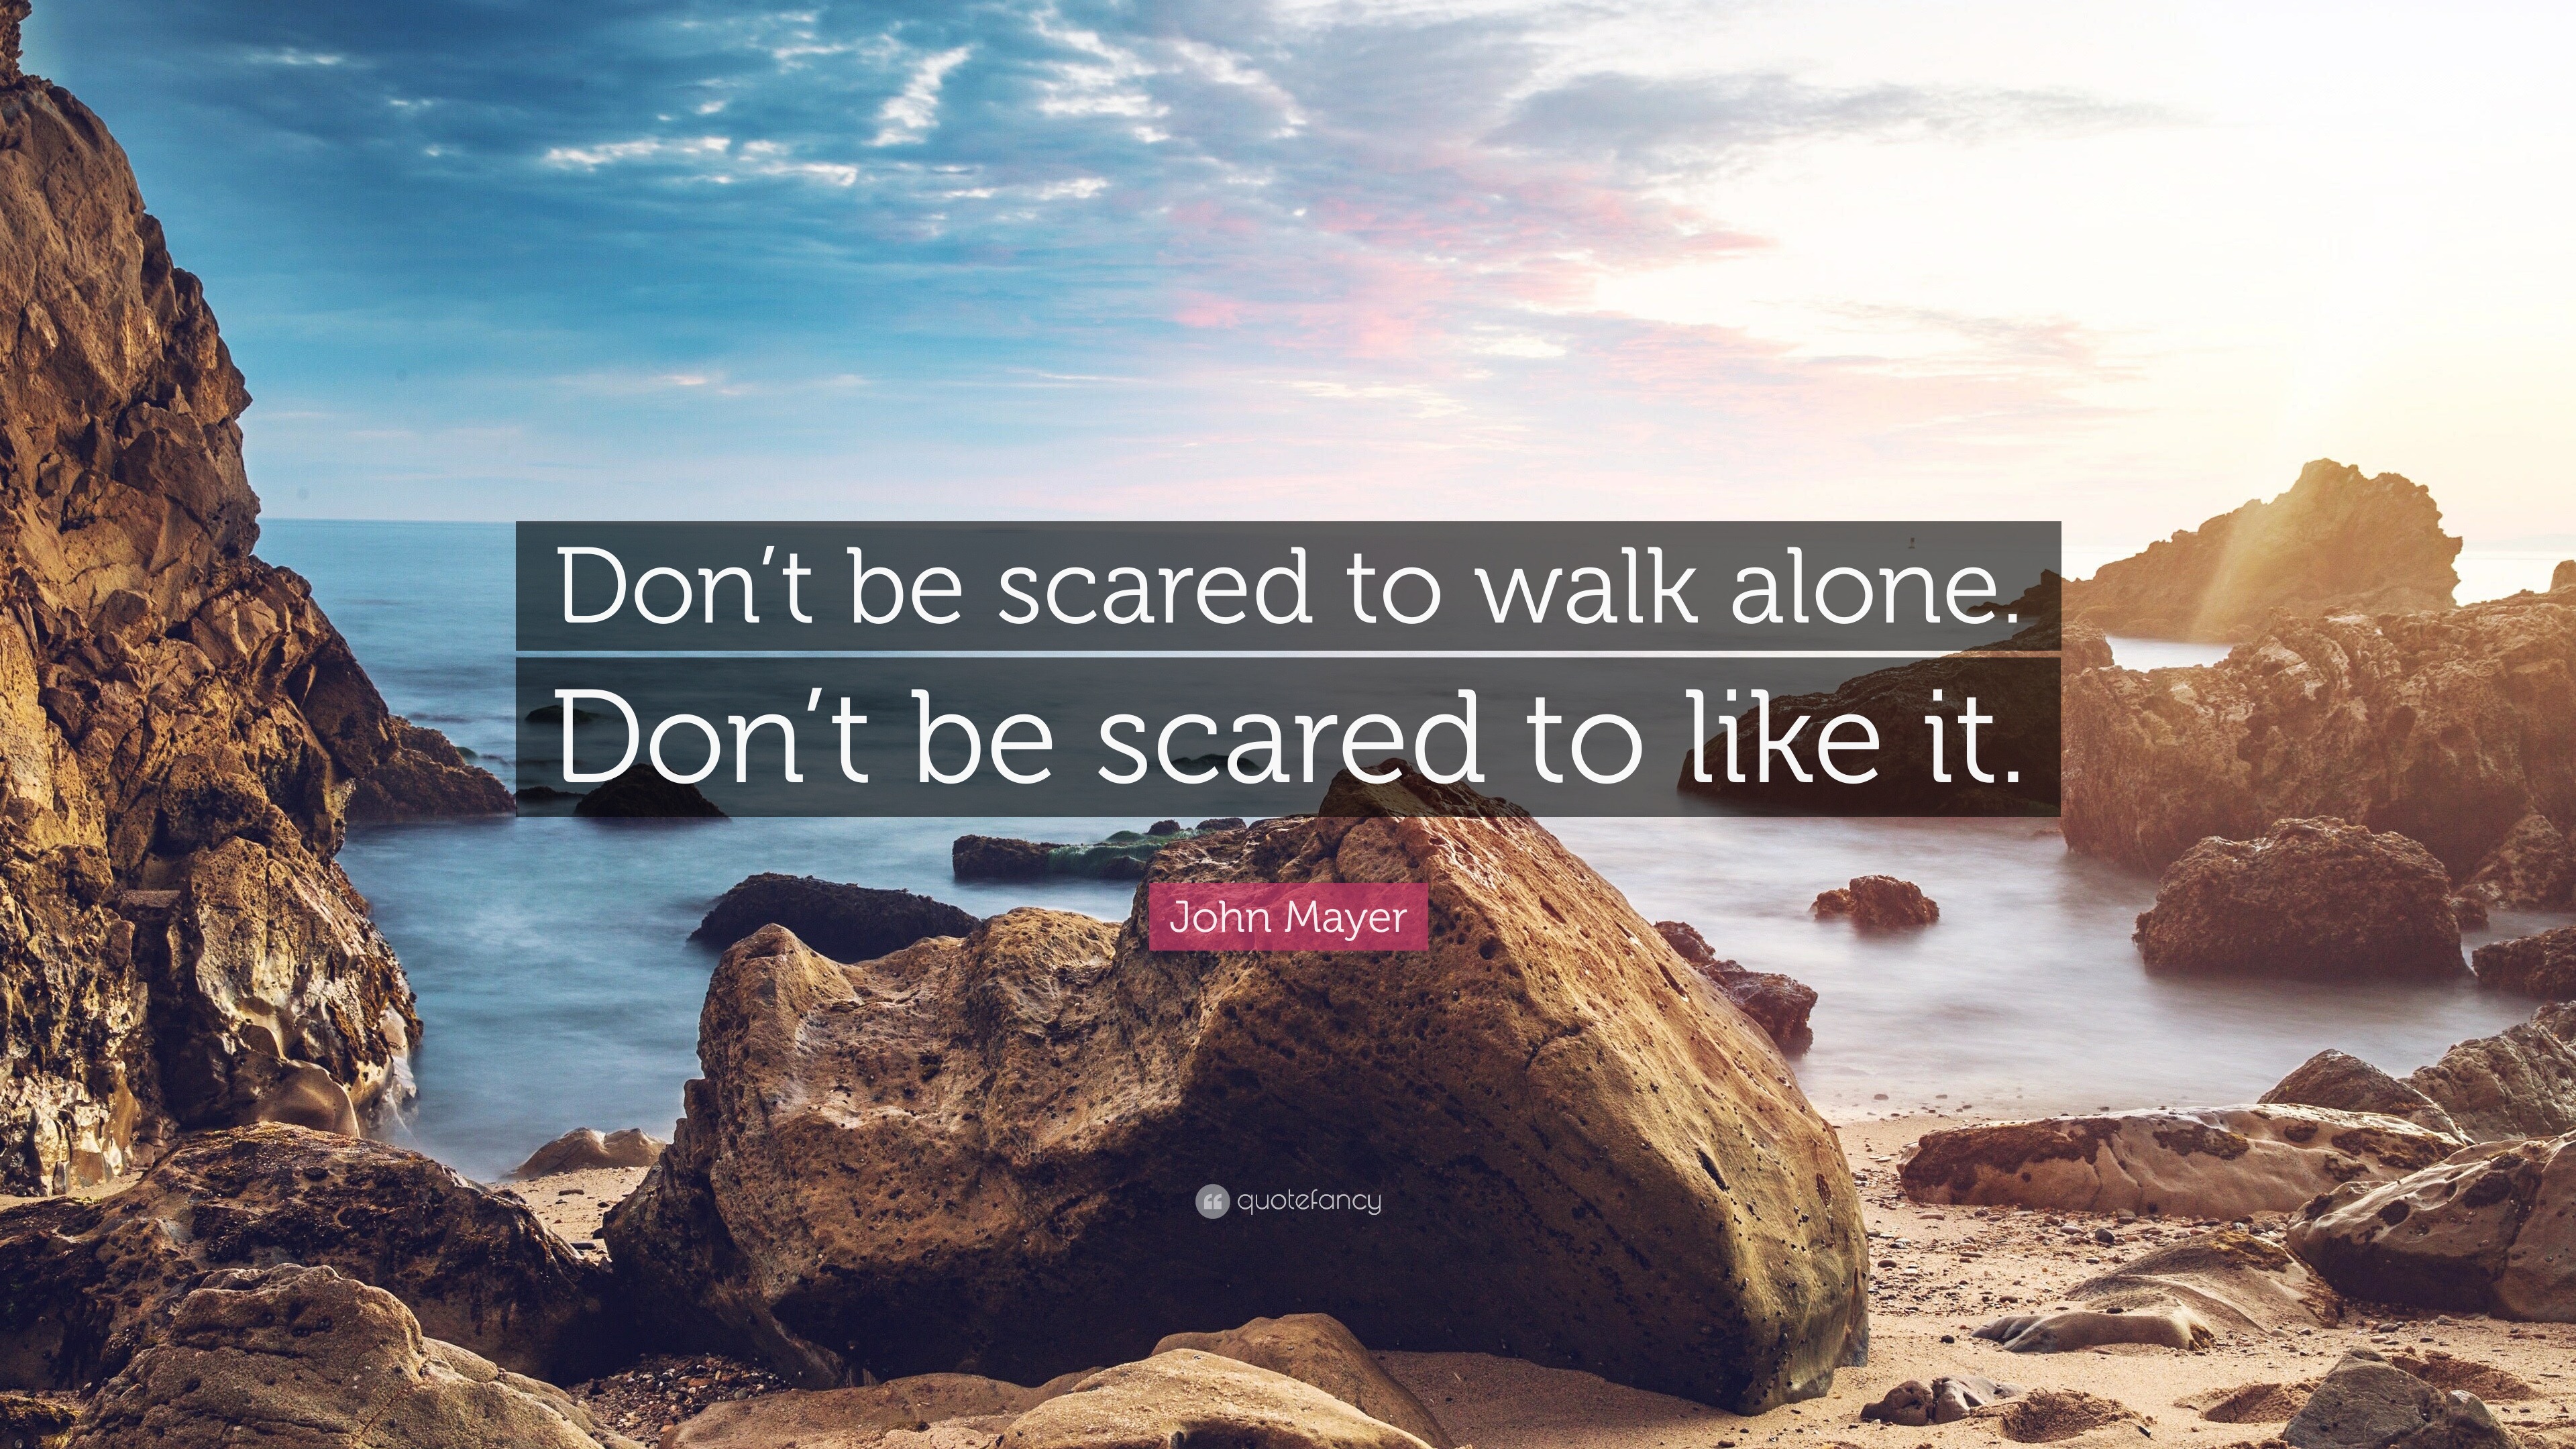 John Mayer Quote: “Don't be scared to walk alone. Don't be scared to like